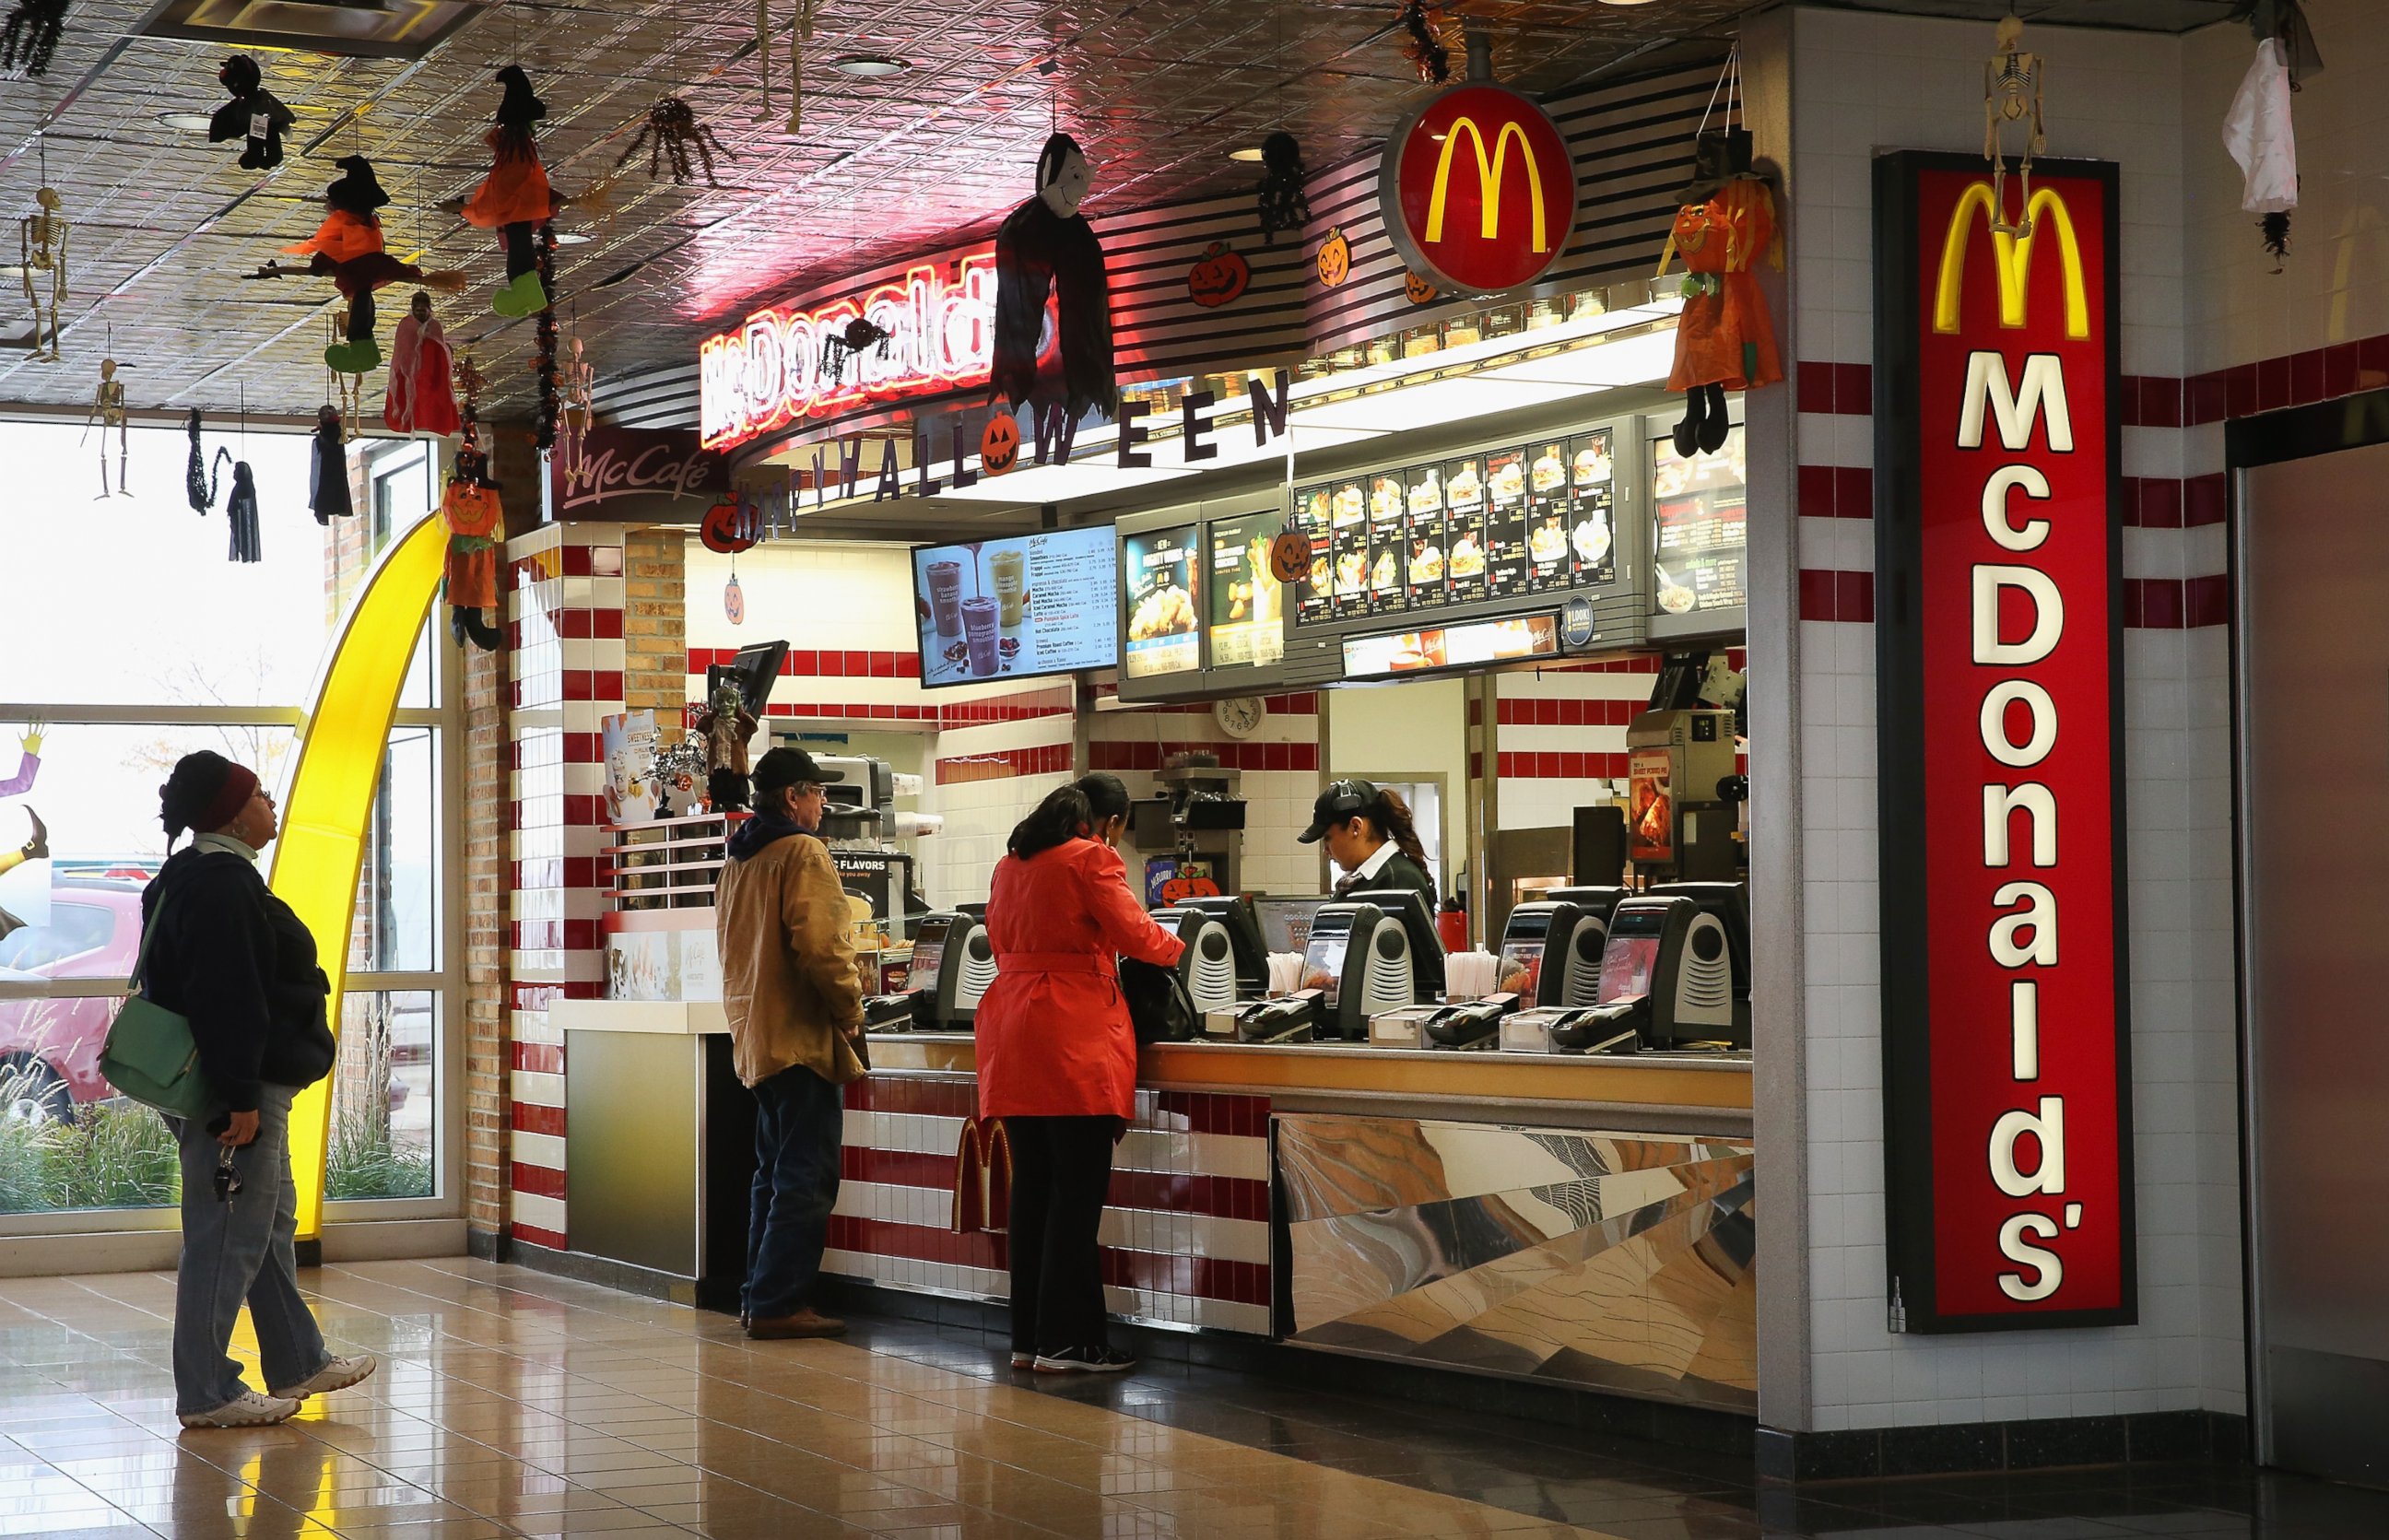 PHOTO: Customers order food from a McDonald's restaurant on Oct. 24, 2013 in Des Plaines, Ill.